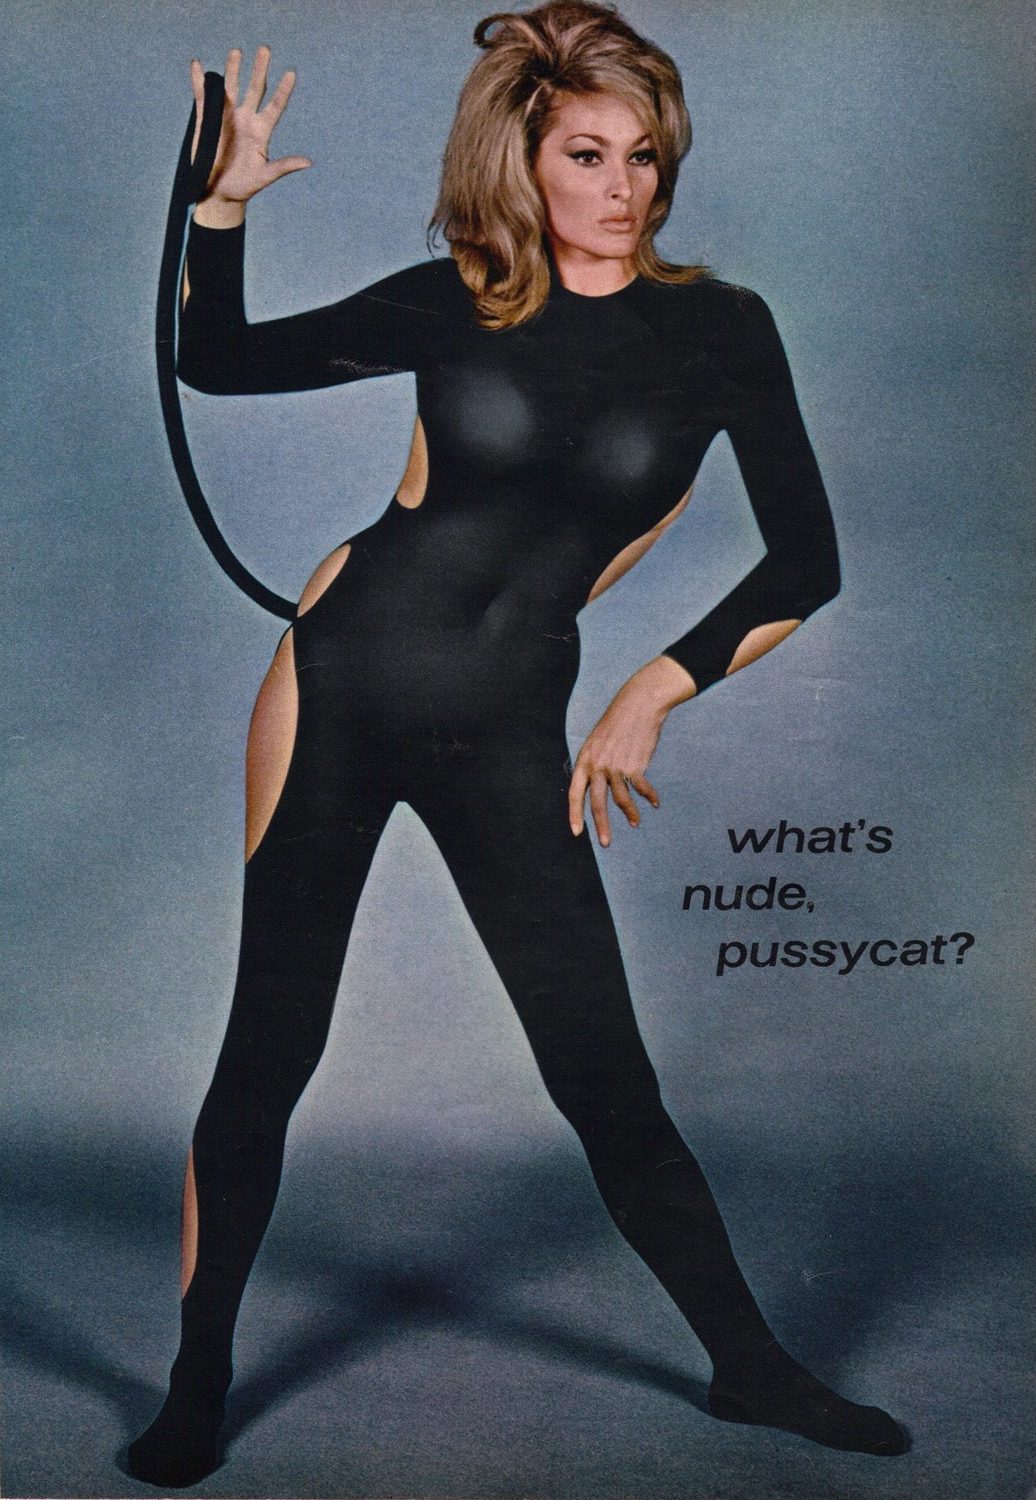 carol huerta recommends ursula andress in playboy pic